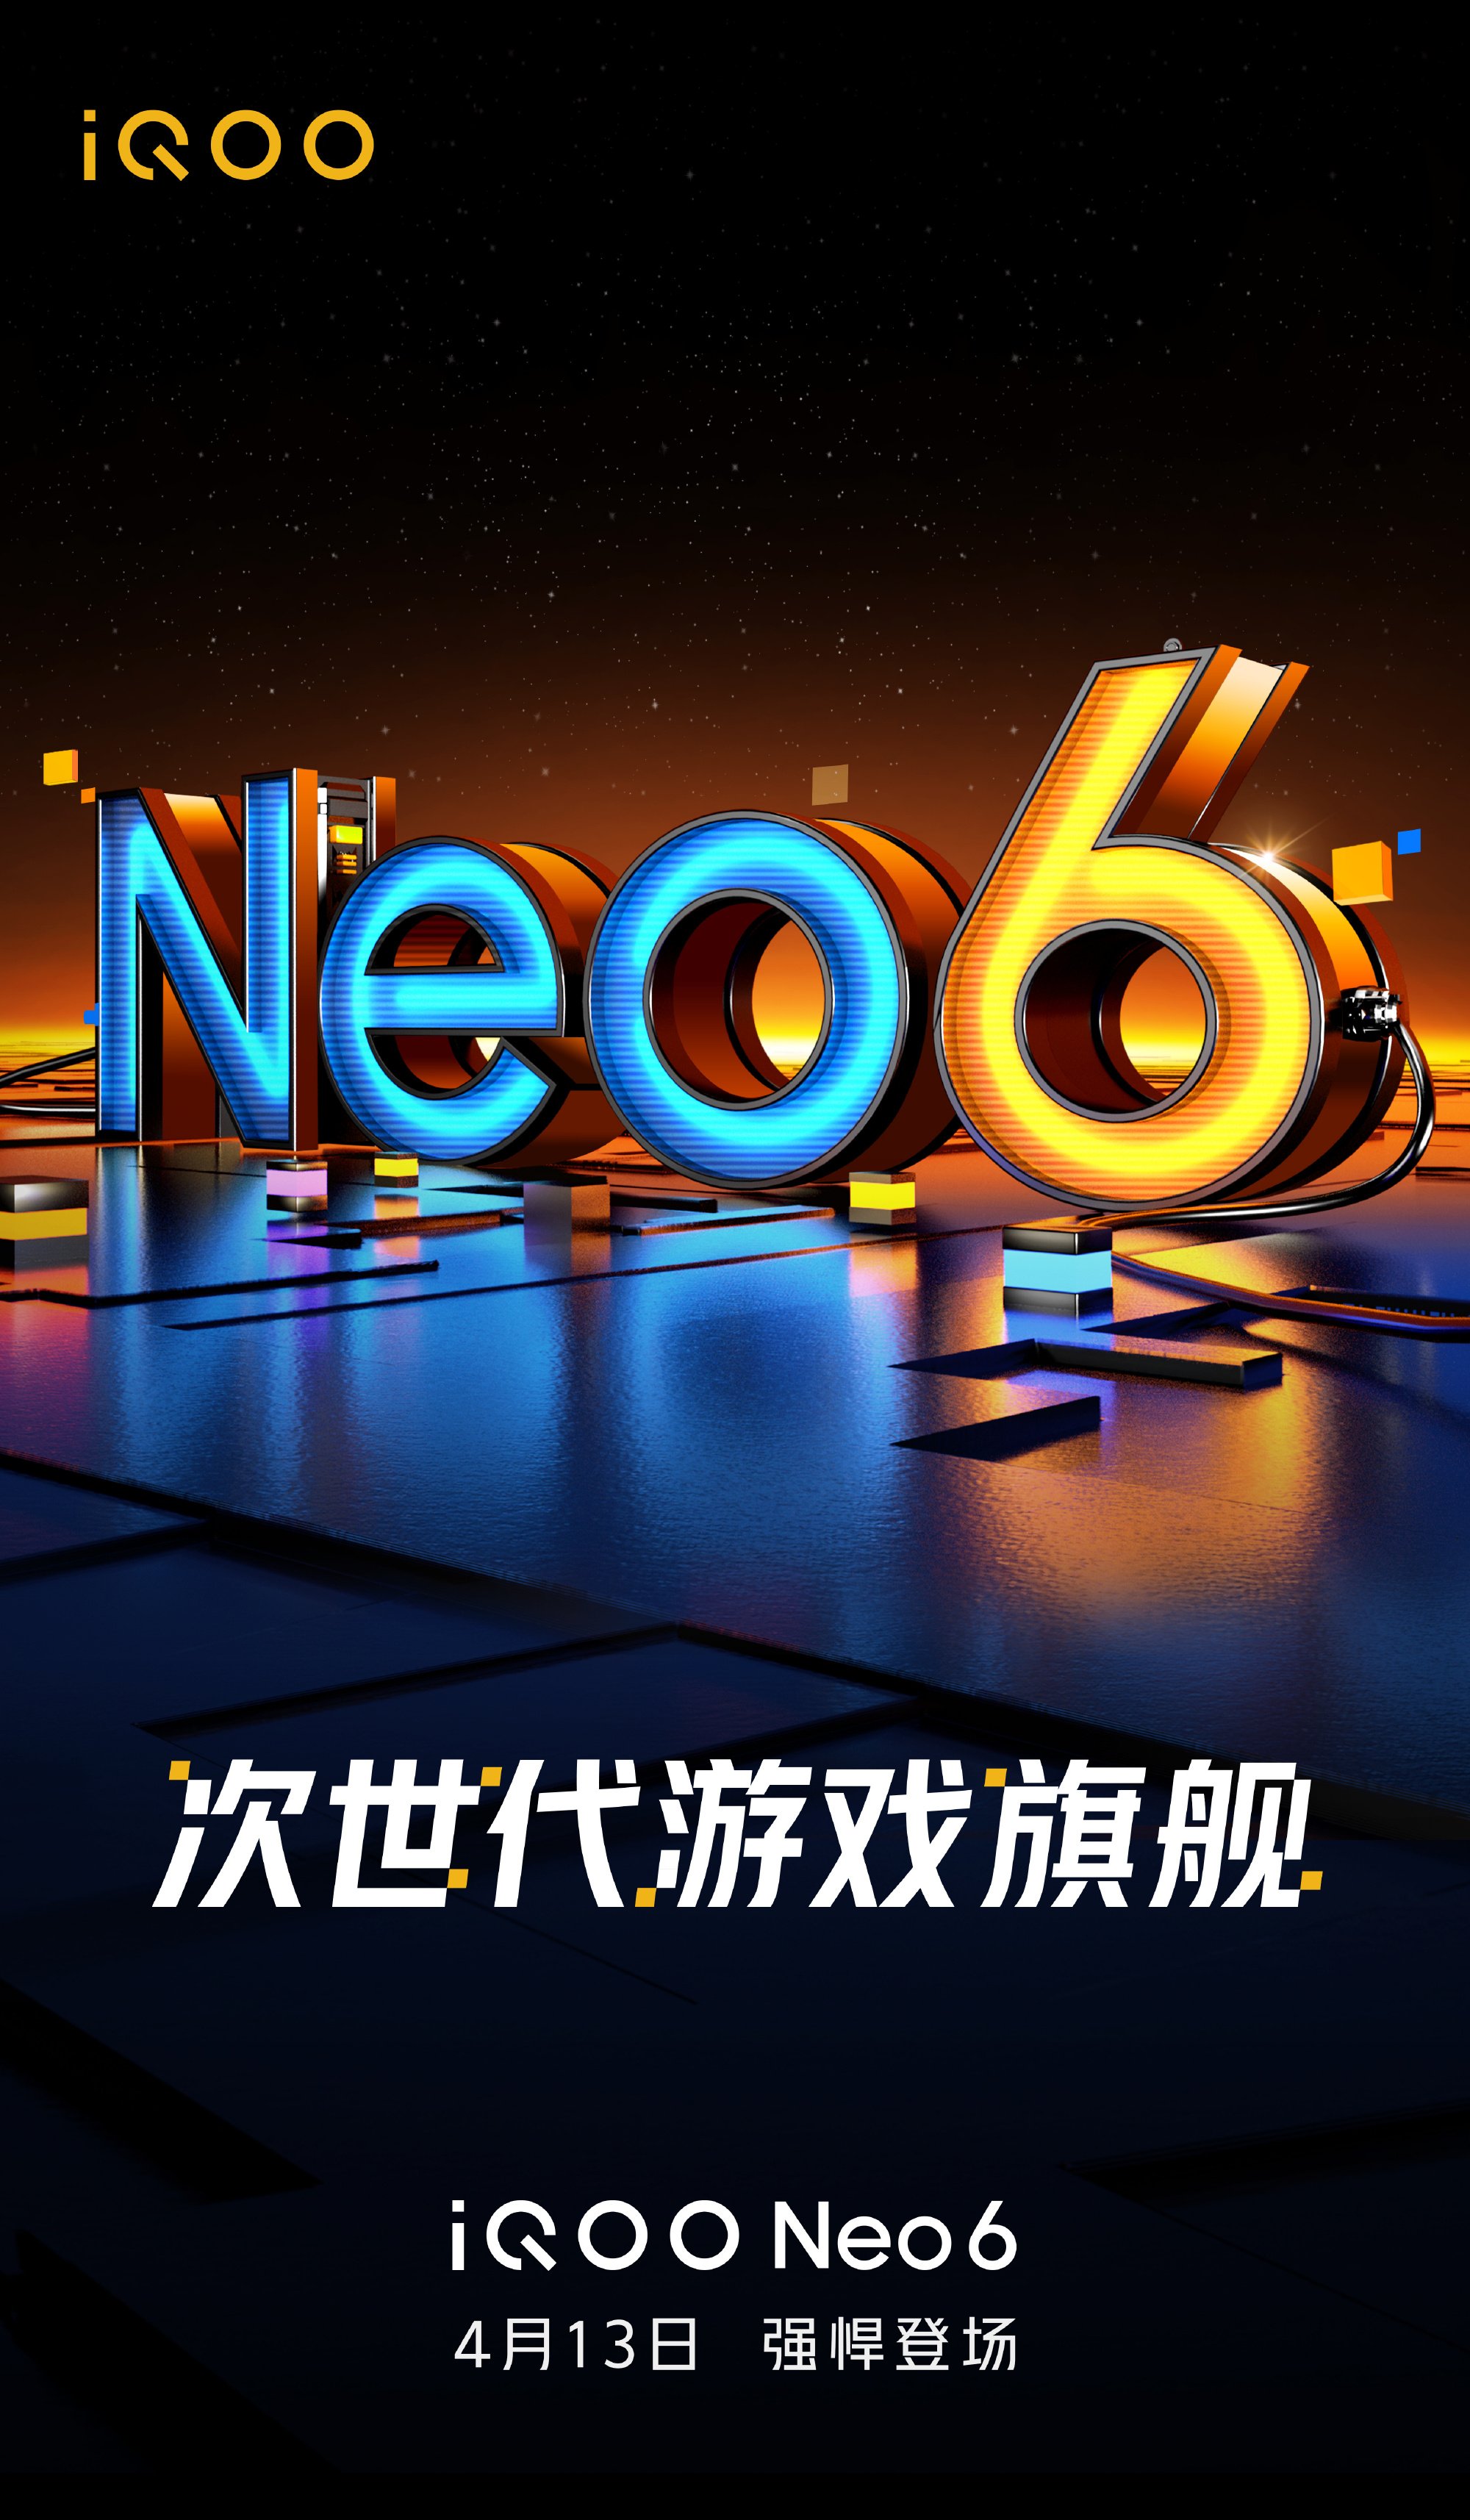 iQOO Neo6 launch date poster